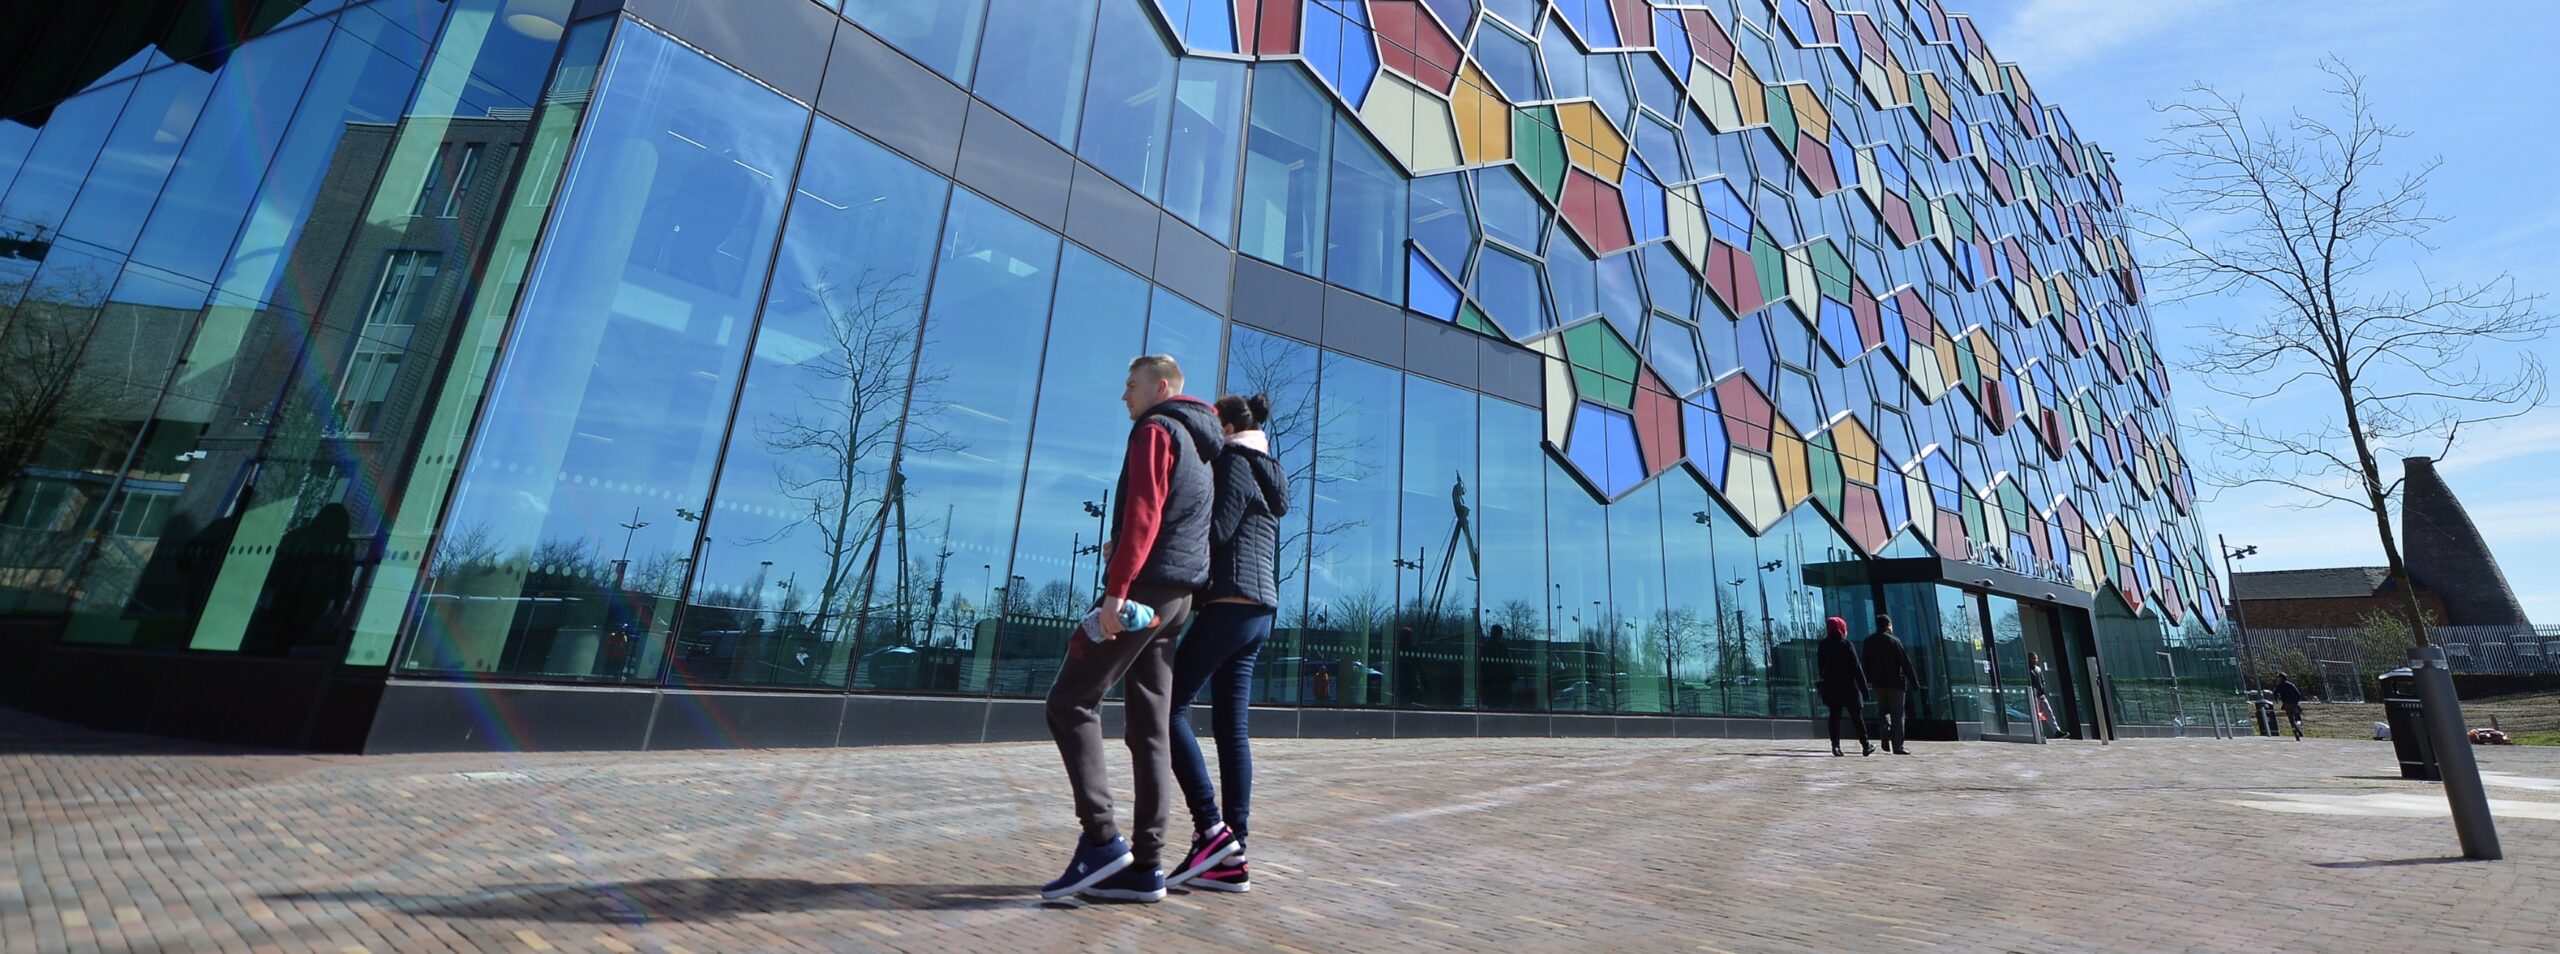 Two people walking in front of glass building with geometric design